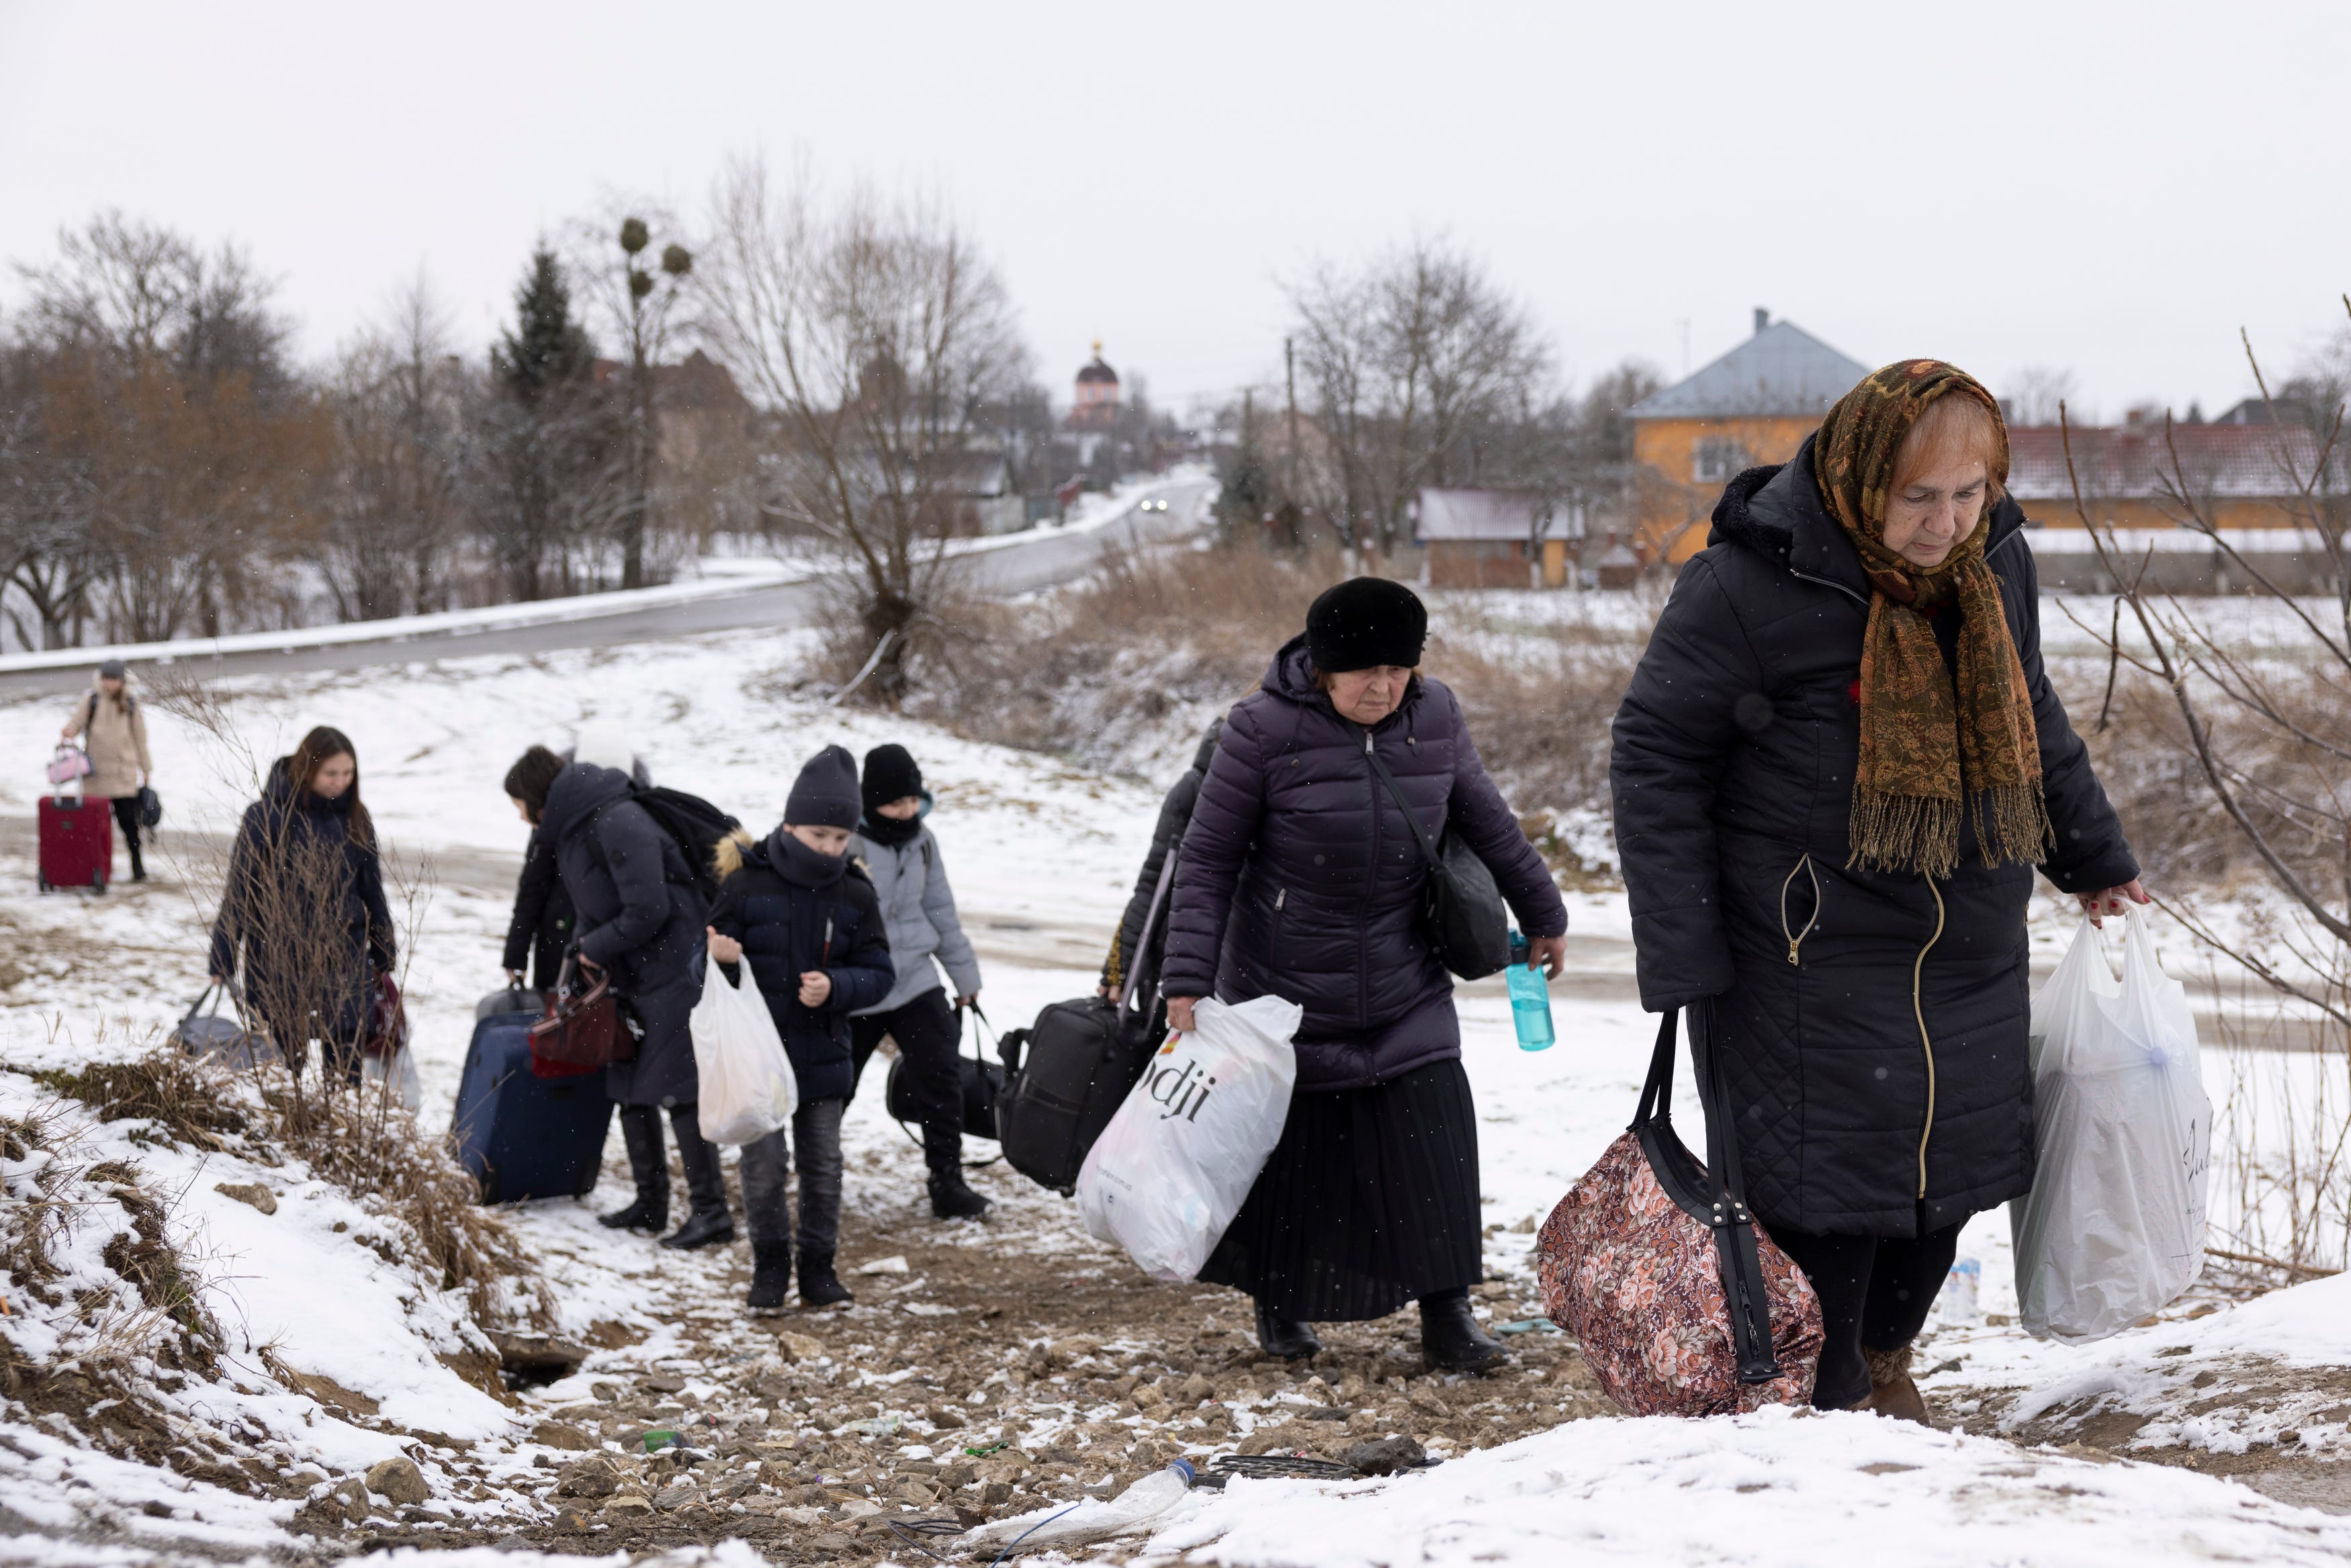 Millions of Ukrainian refugees are fleeing Where are they going?